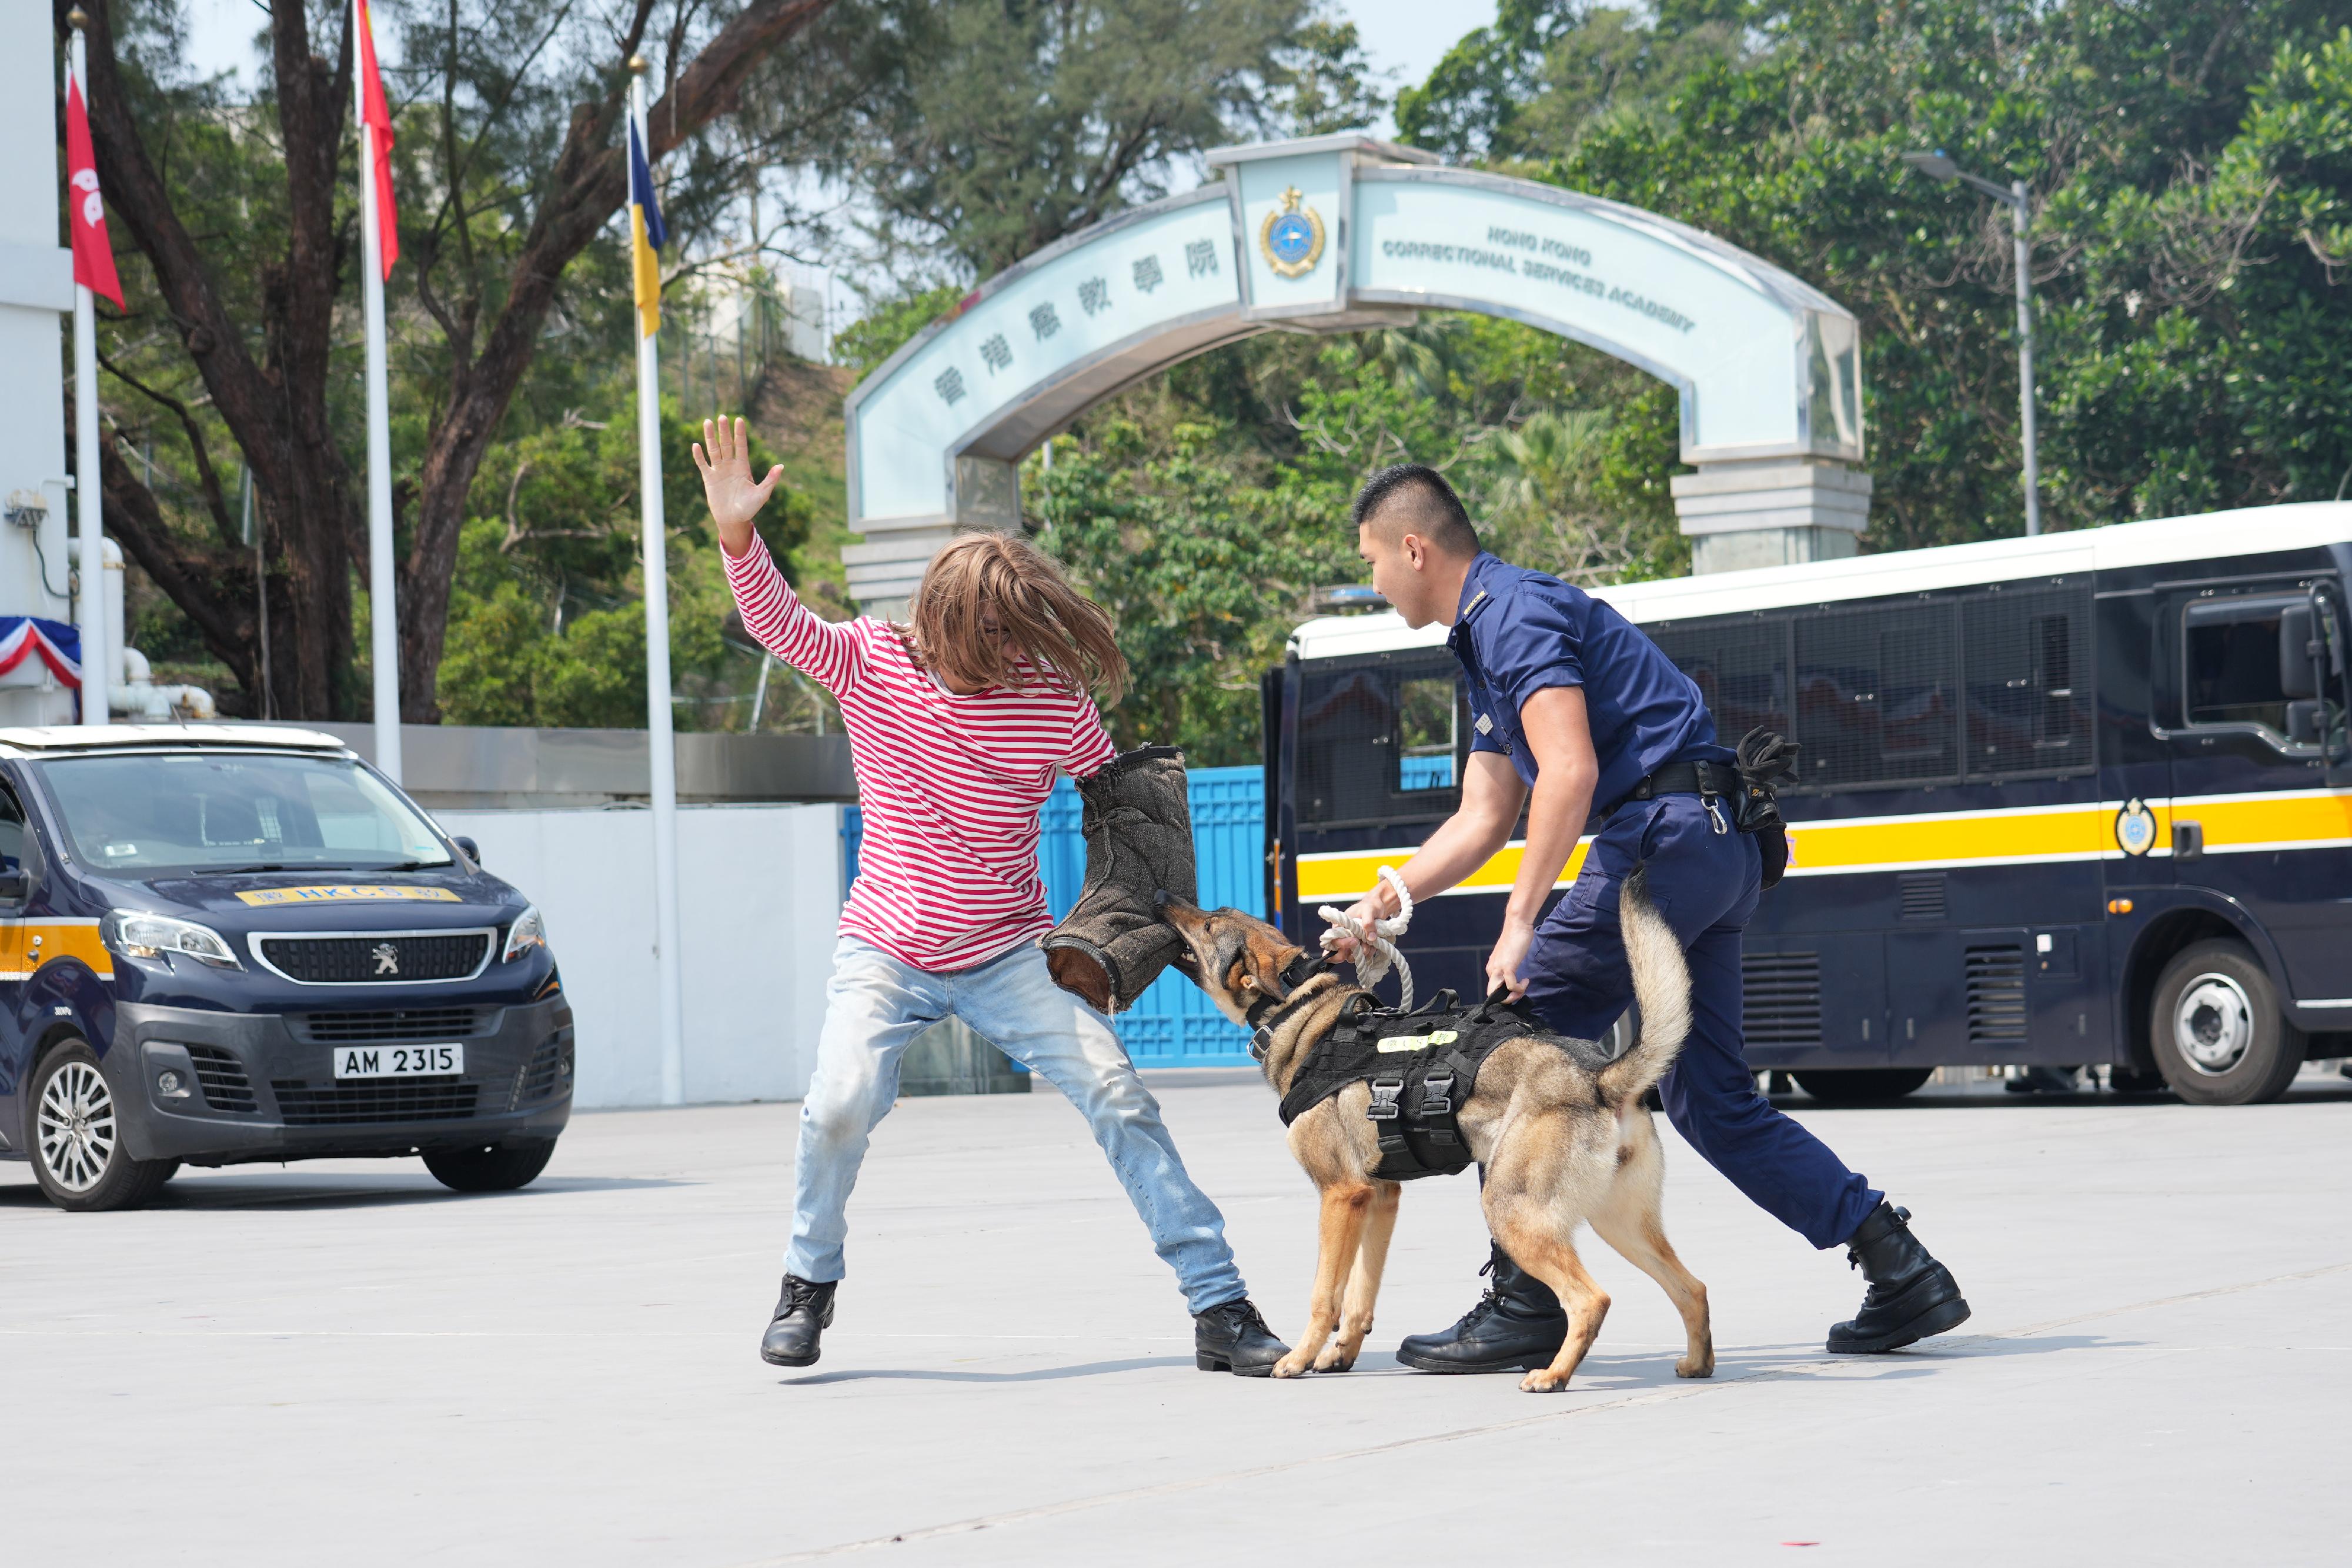 To support National Security Education Day on April 15, the Correctional Services Department held an open day at the Hong Kong Correctional Services Academy today (April 13) to raise public awareness of national security and enhance public understanding of its work in safeguarding national security. Photo shows a demonstration by the Dog Unit.